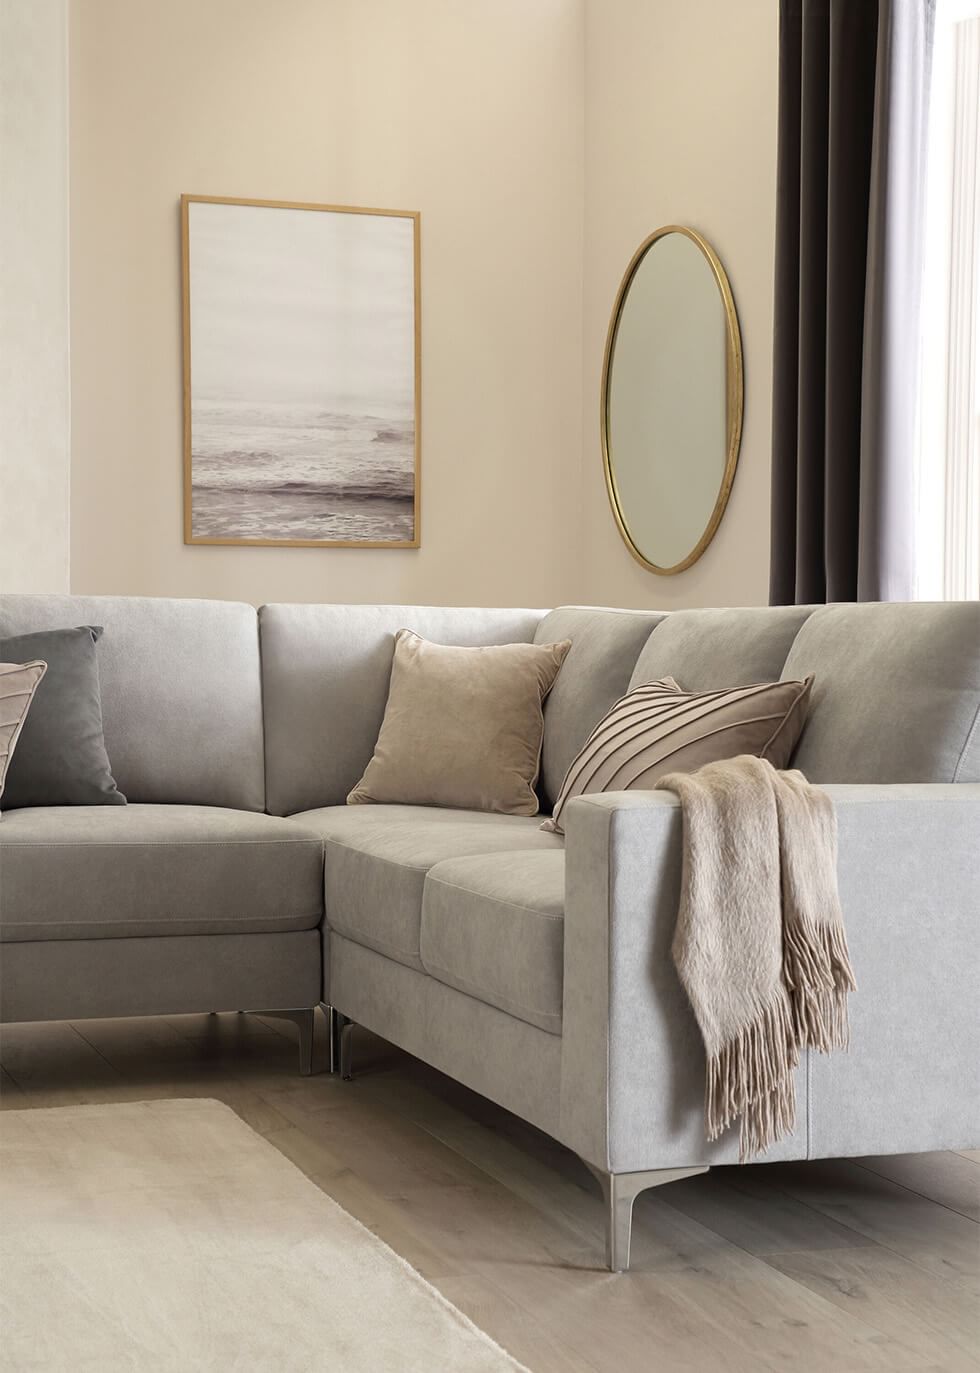 A plush grey sofa with neutral accessories and textures